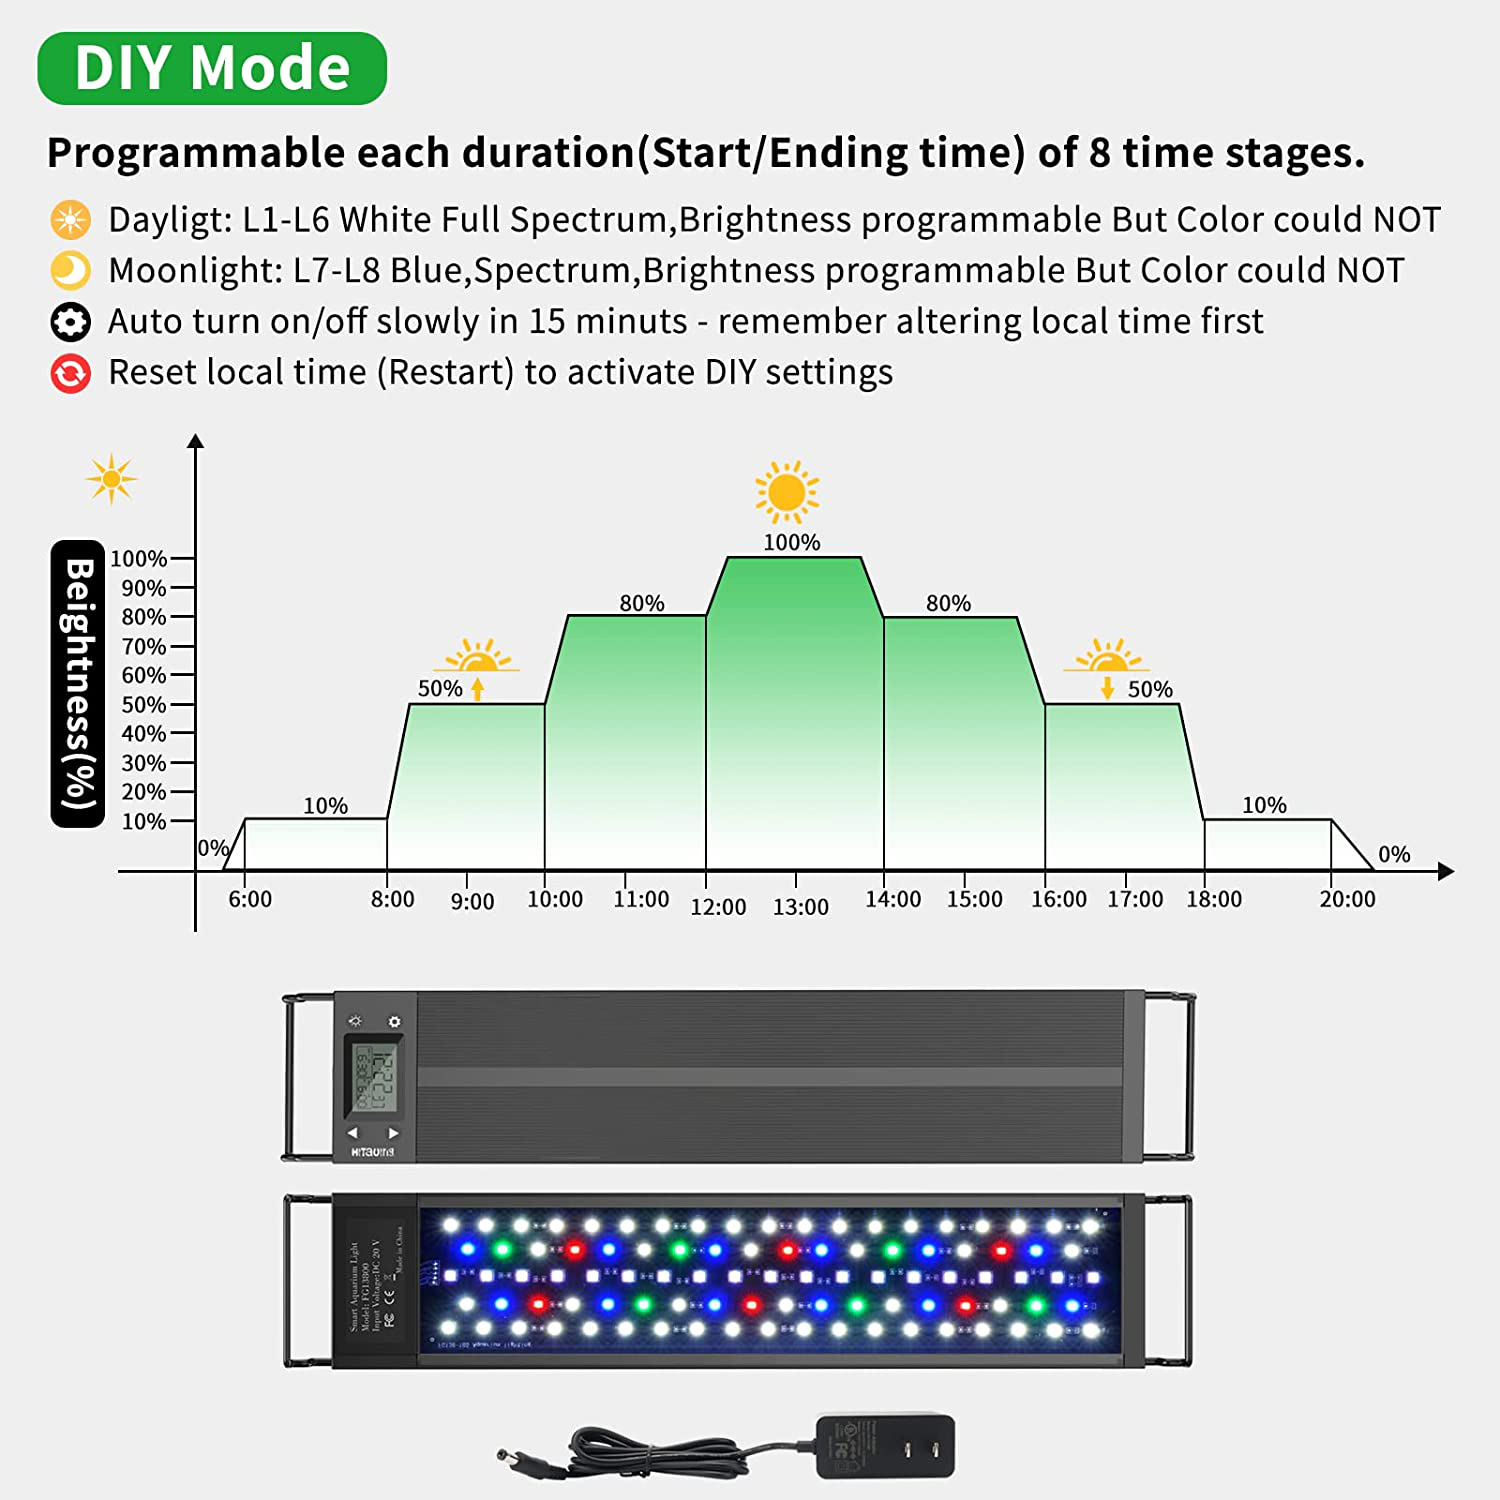 Hitauing LED Aquarium Light, Fish Tank Light Programmable Auto on & off /Timer, 56W Led Light for 36-42 Inch Planted Aquarium Light, Full Spectrum Dimmable 7 Colors 10 Intensity &LCD Controller